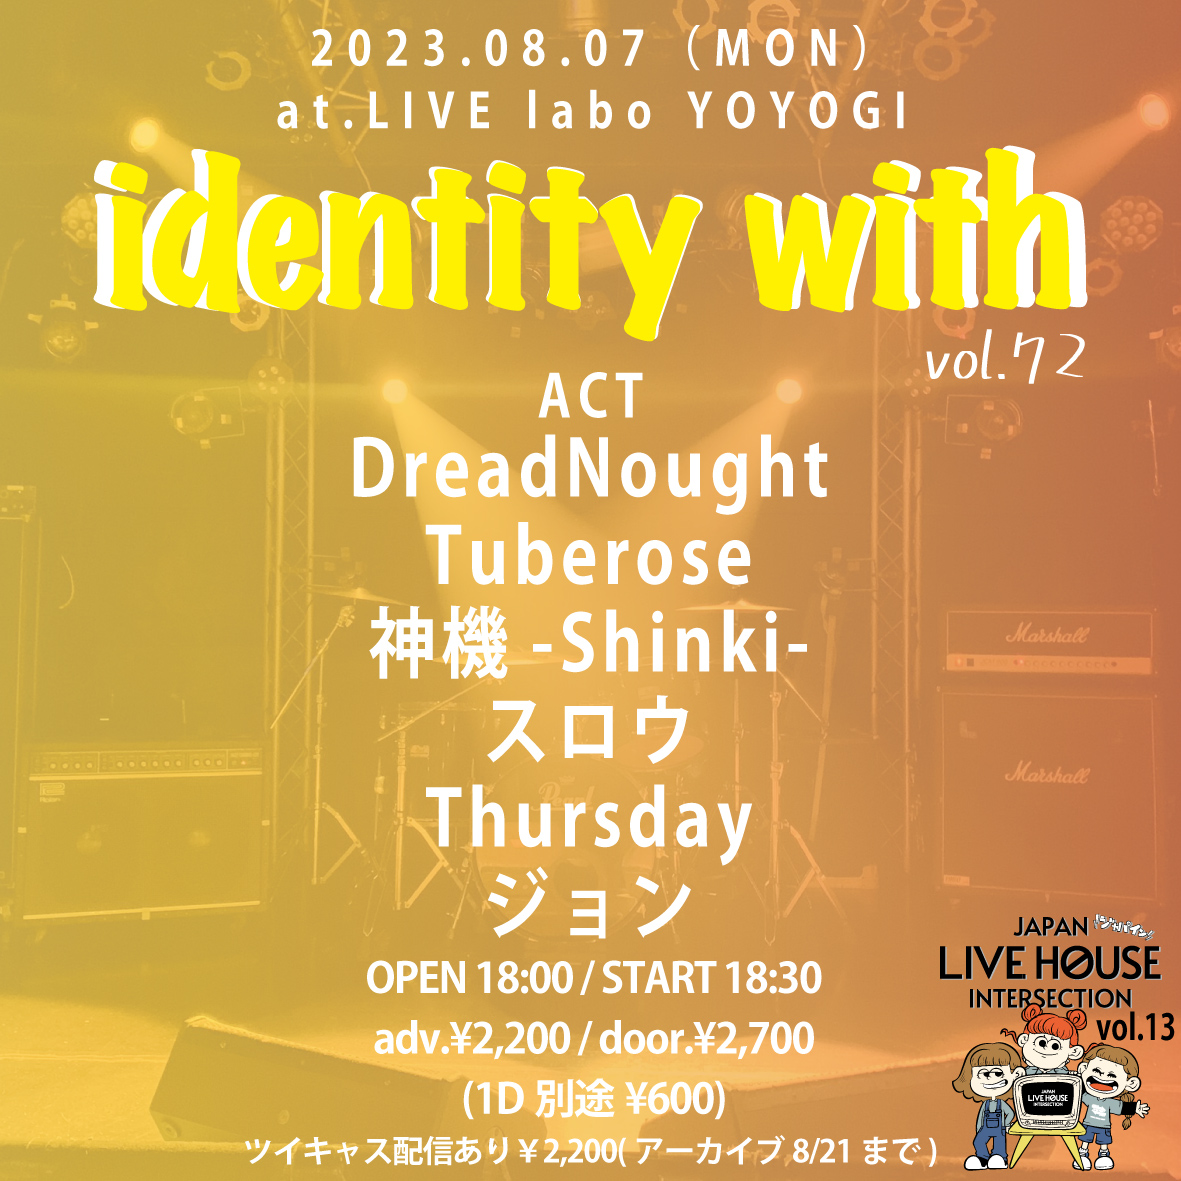 identity with vol.72
-JAPAN LIVE HOUSE INTERSECTION vol.13-